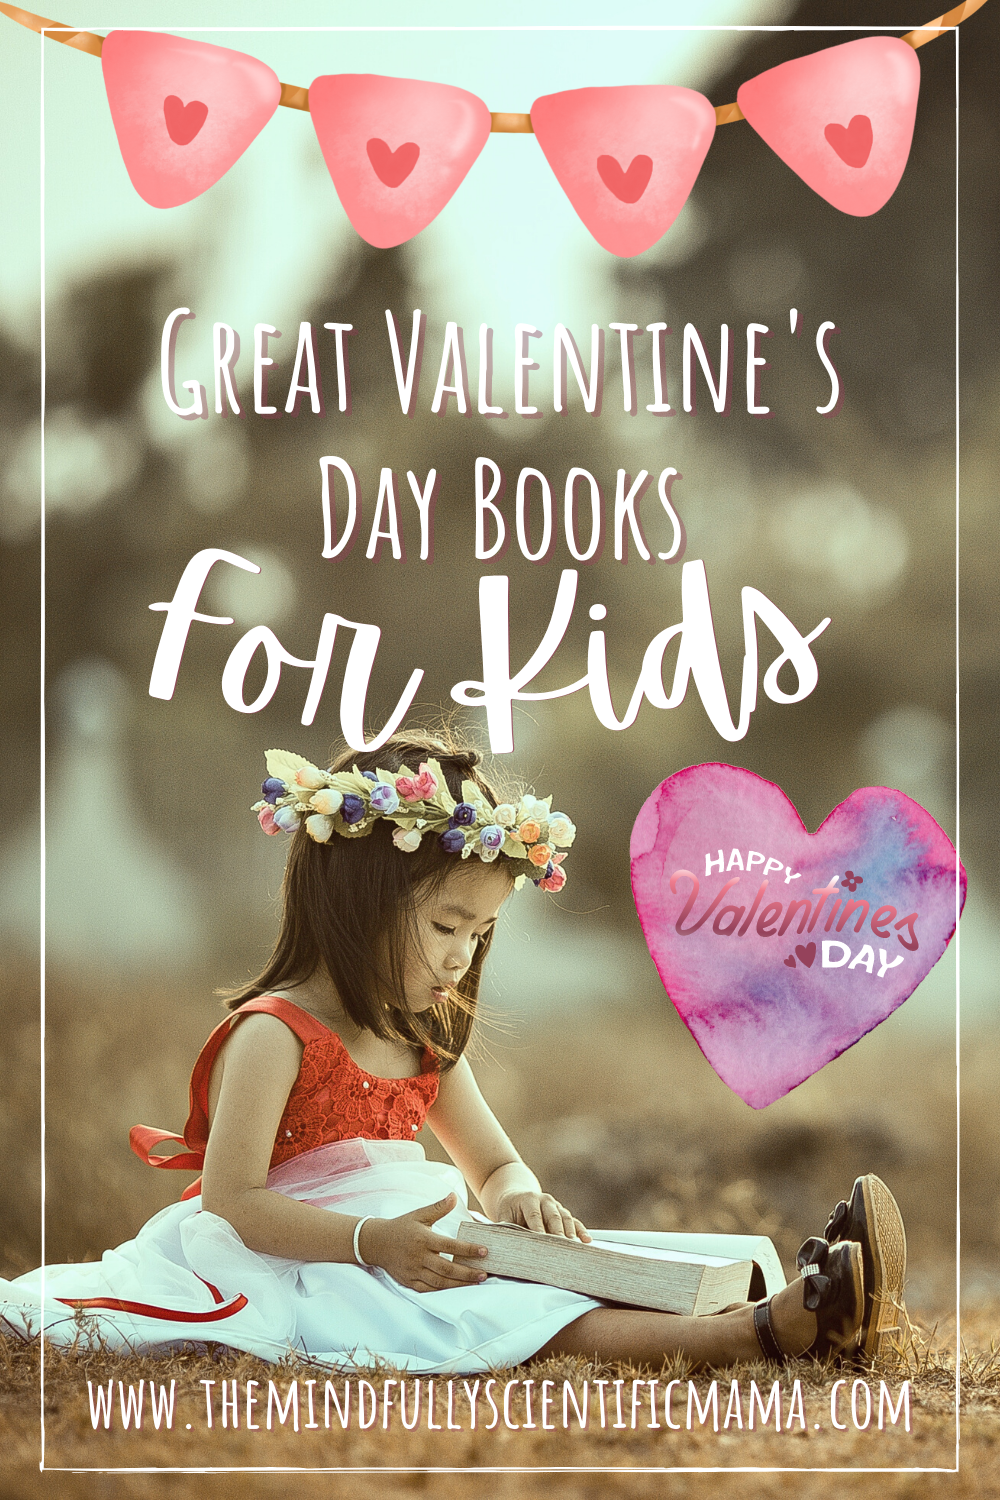 Great Valentine's Day Books for Babies, Toddlers, Preschoolers, and Elementary School Students. [Picture of girl reading]